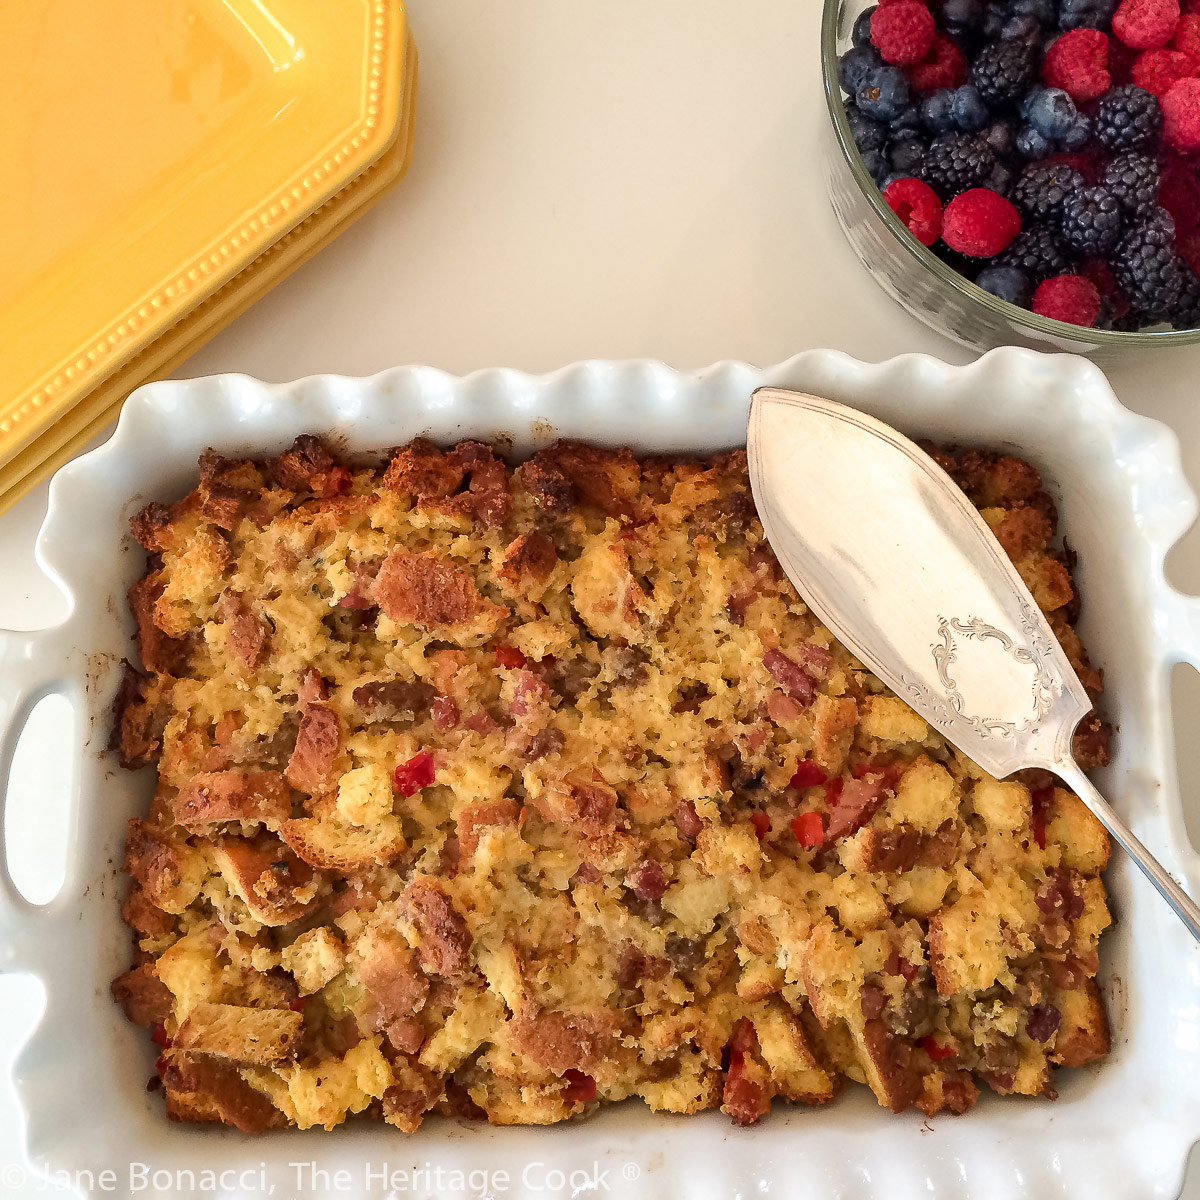 Breakfast Strata (savory bread pudding) and Marina del Rey Morning in Southern California © 2022 Jane Bonacci, The Heritage Cook.